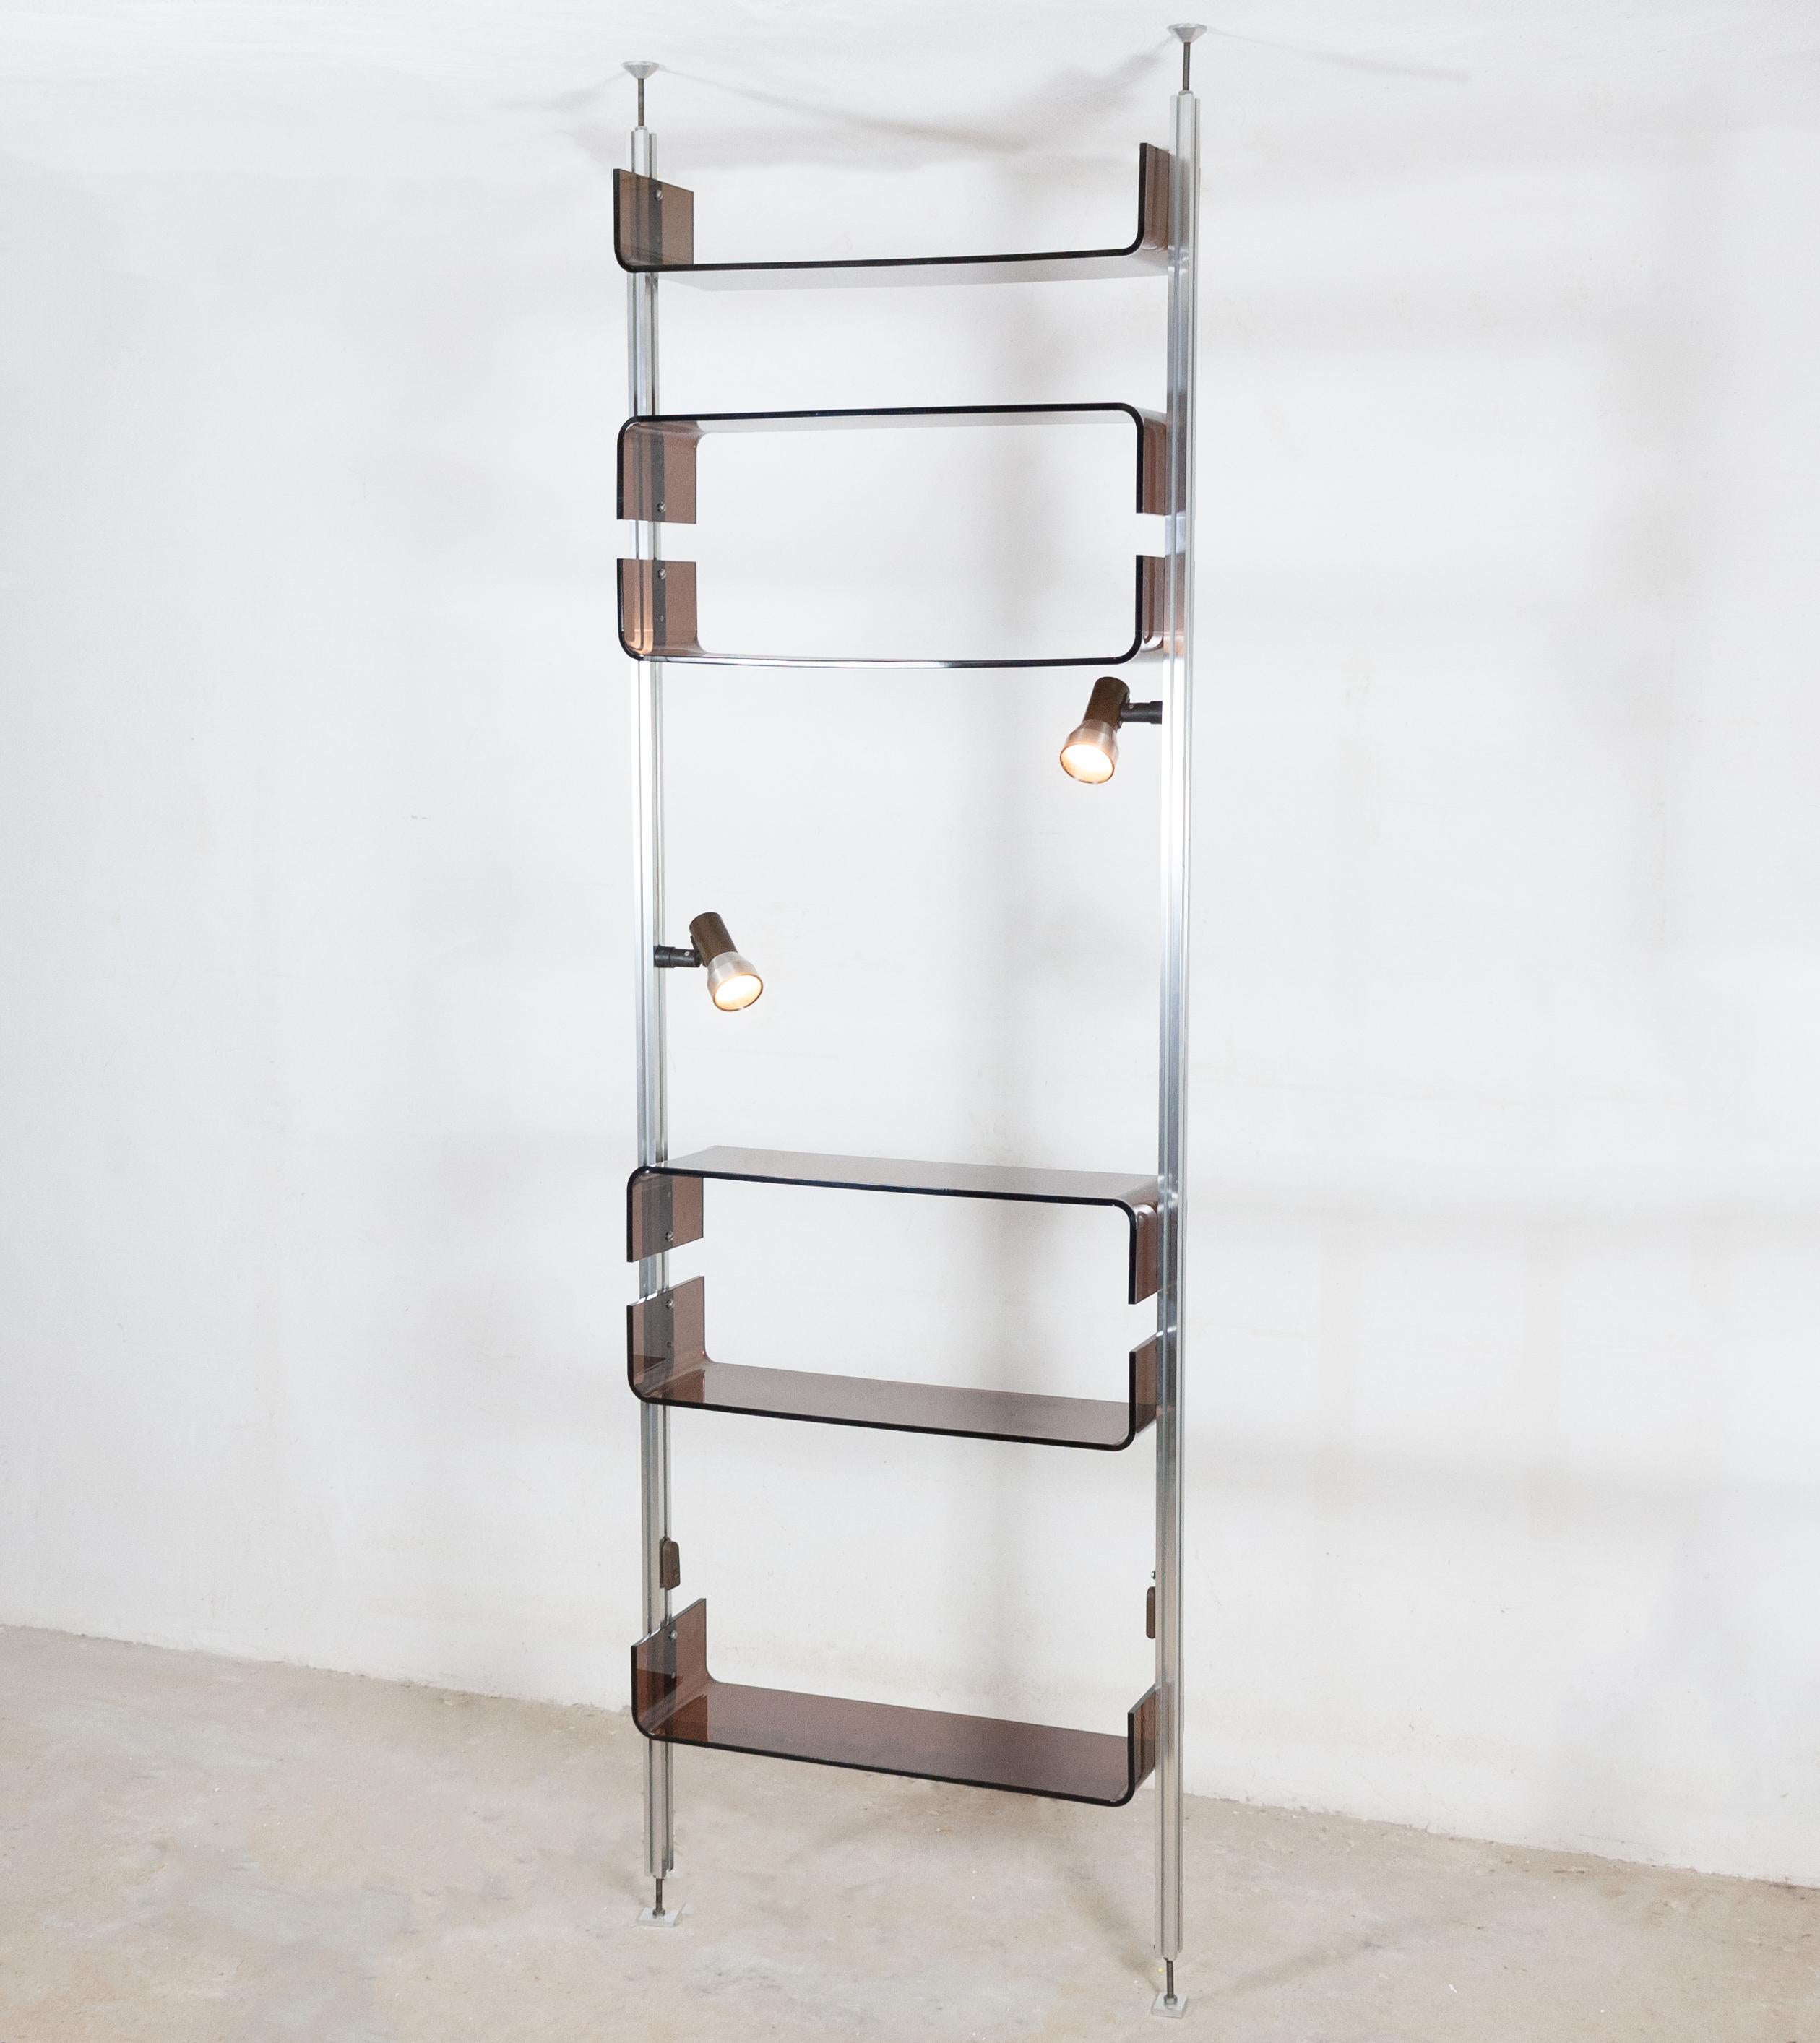 Beautiful shelving unit designed by Michel Ducaroy for the French designer furniture company Roche Bobois in 1970. 

The unit consists of six Lucite shelves and two integrated spotlights which attach to a pair of metal uprights clamped between floor